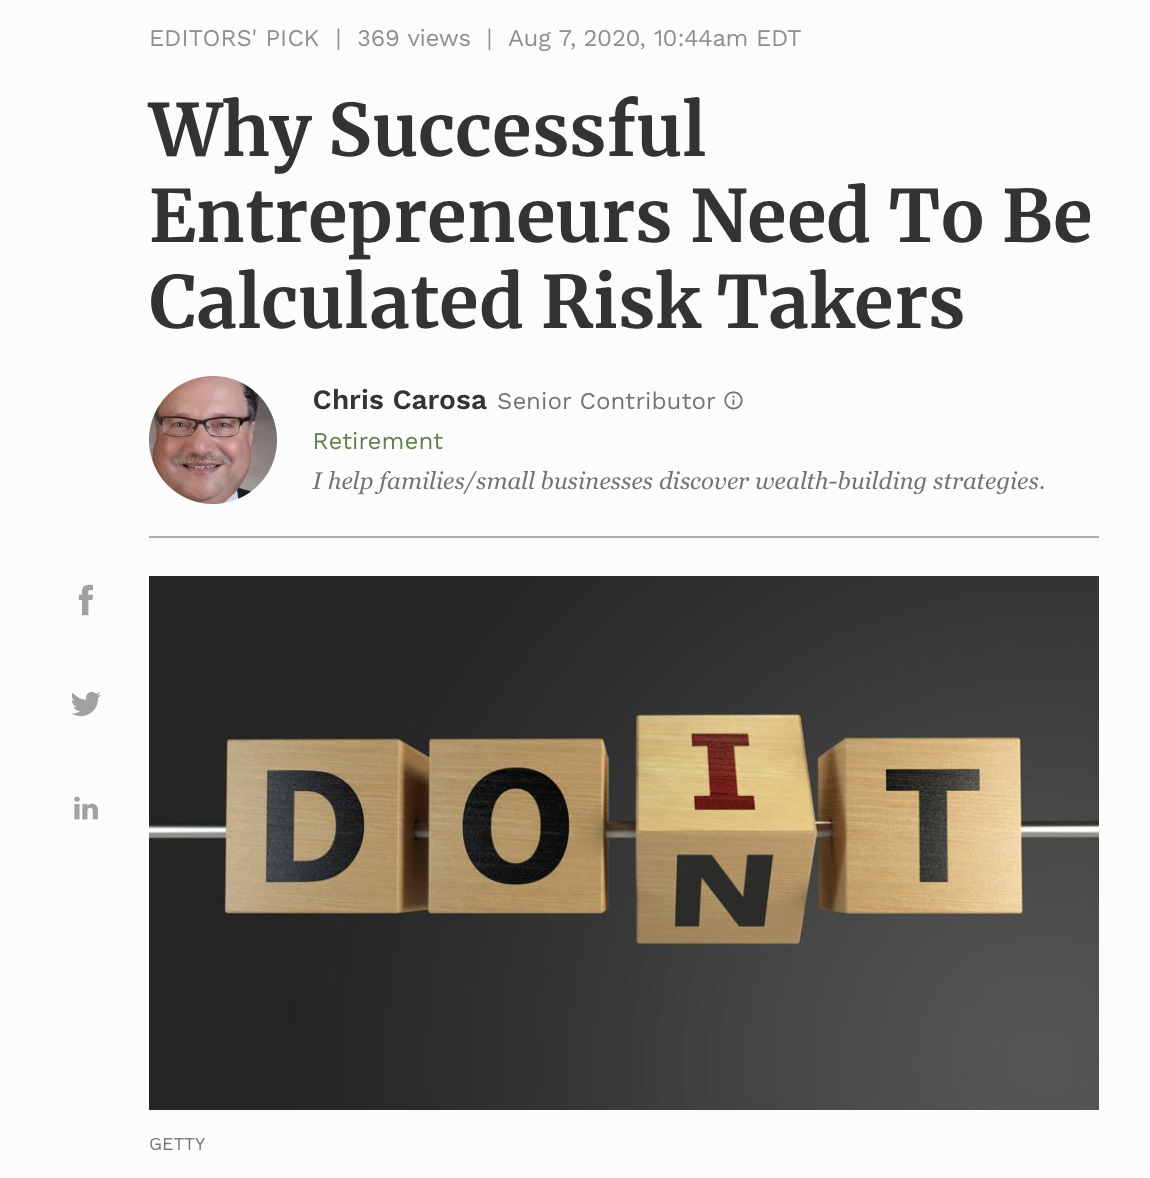 Why Successful Entrepreneurs Need To Be Calculated Risk Takers